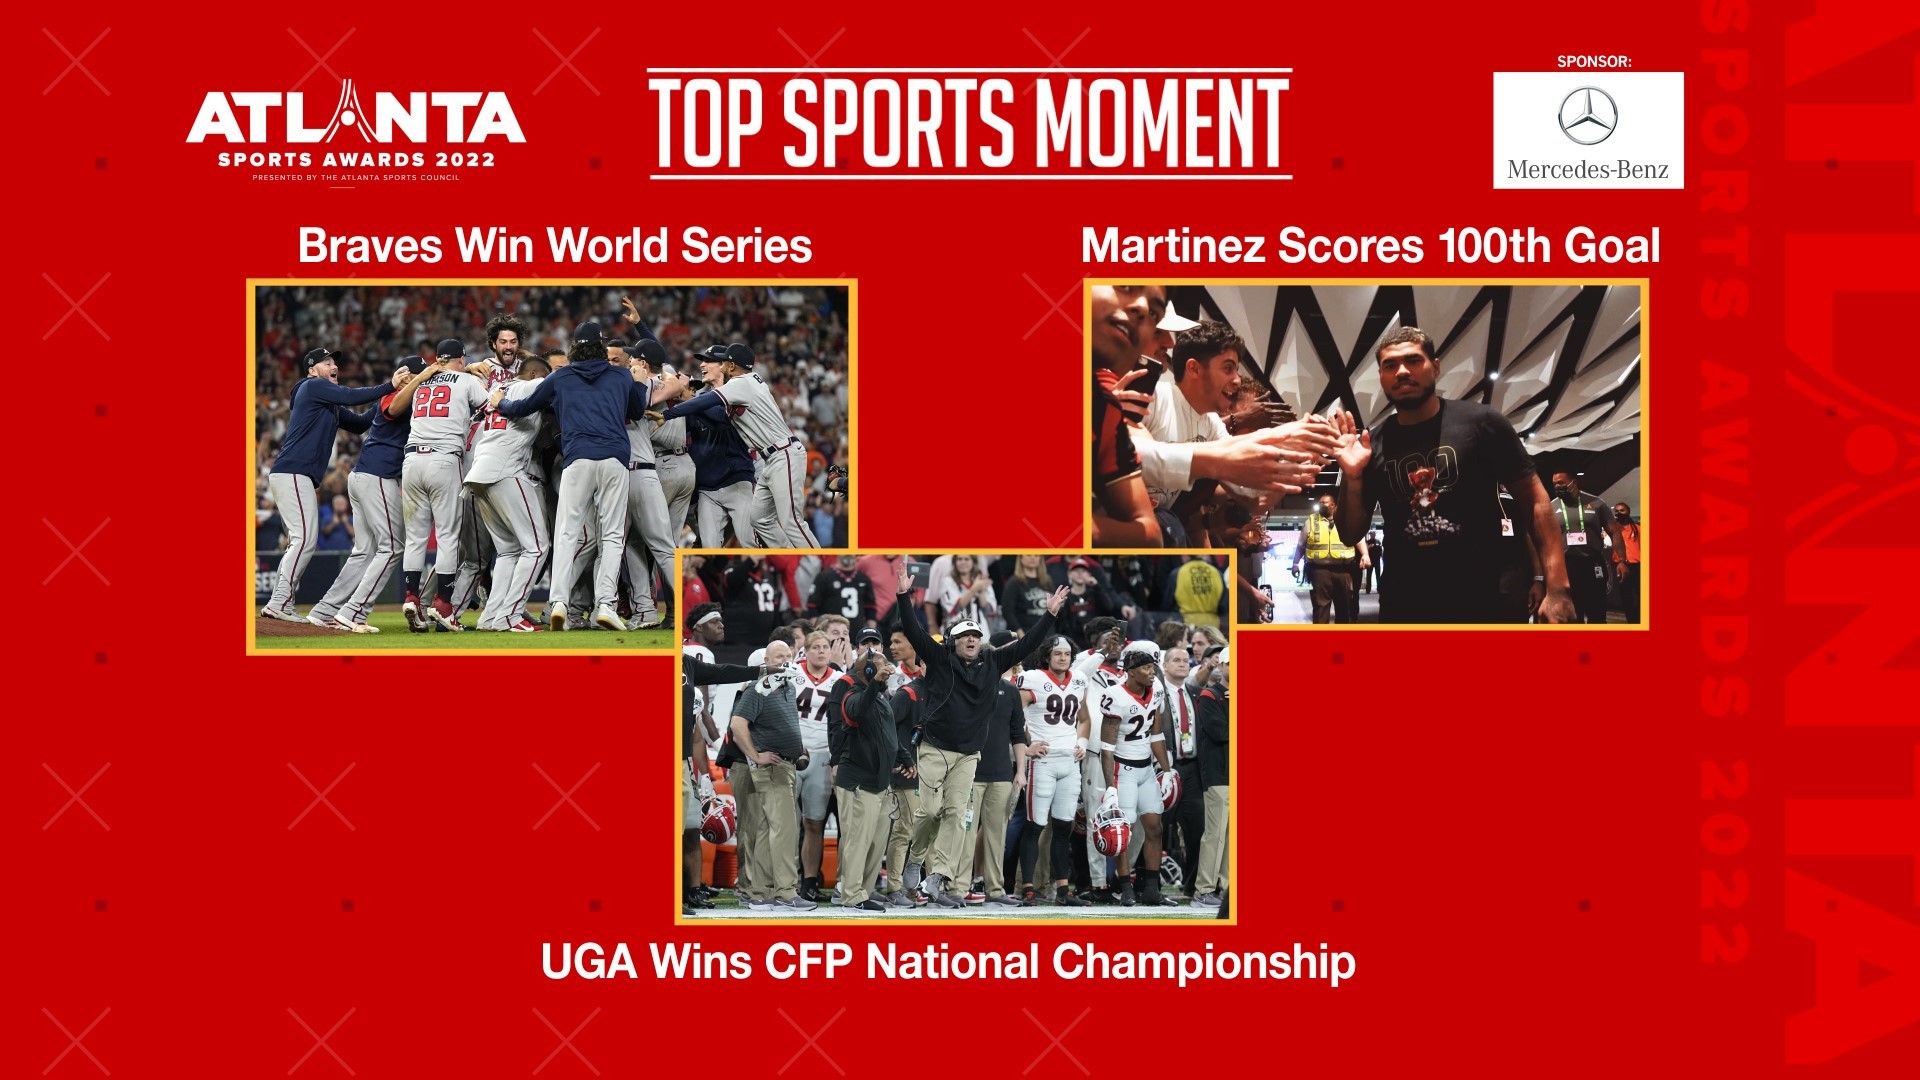 These are the nominees in the Top Sports Moment presented by Mercedes-Benz.